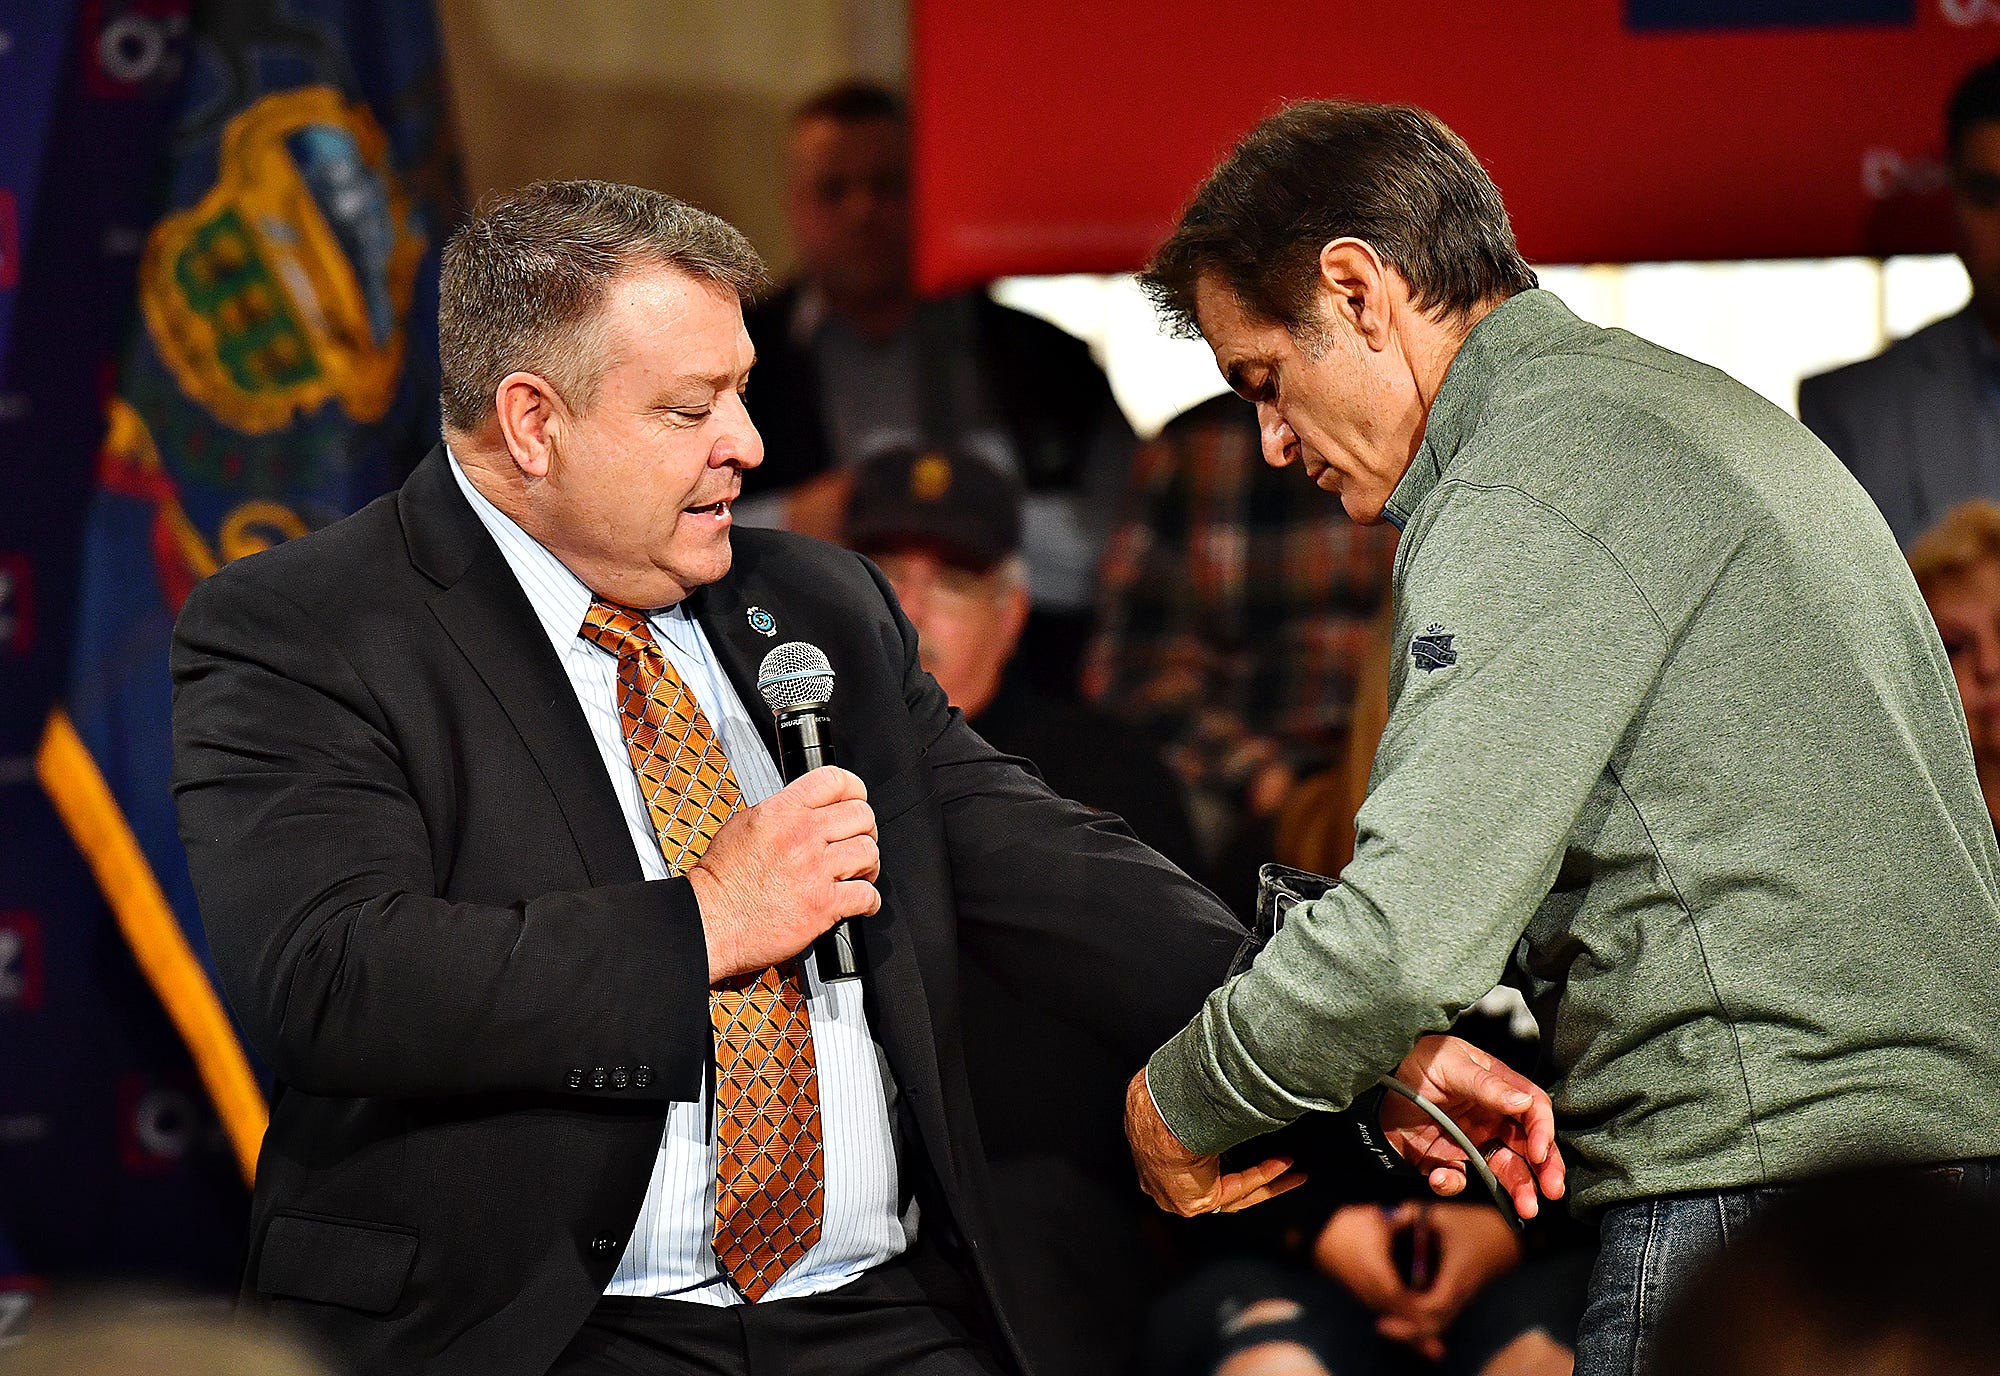 Dr. Mehmet Oz, right, takes a blood pressure reading for York County Regional Police Lt. Tobin Zech as they discuss law enforcement, during the fourth stop along the Doctor Oz for Senate campaign trail, at Wisehaven Event Center in Windsor Township, Saturday, Feb. 5, 2022. Dawn J. Sagert photo